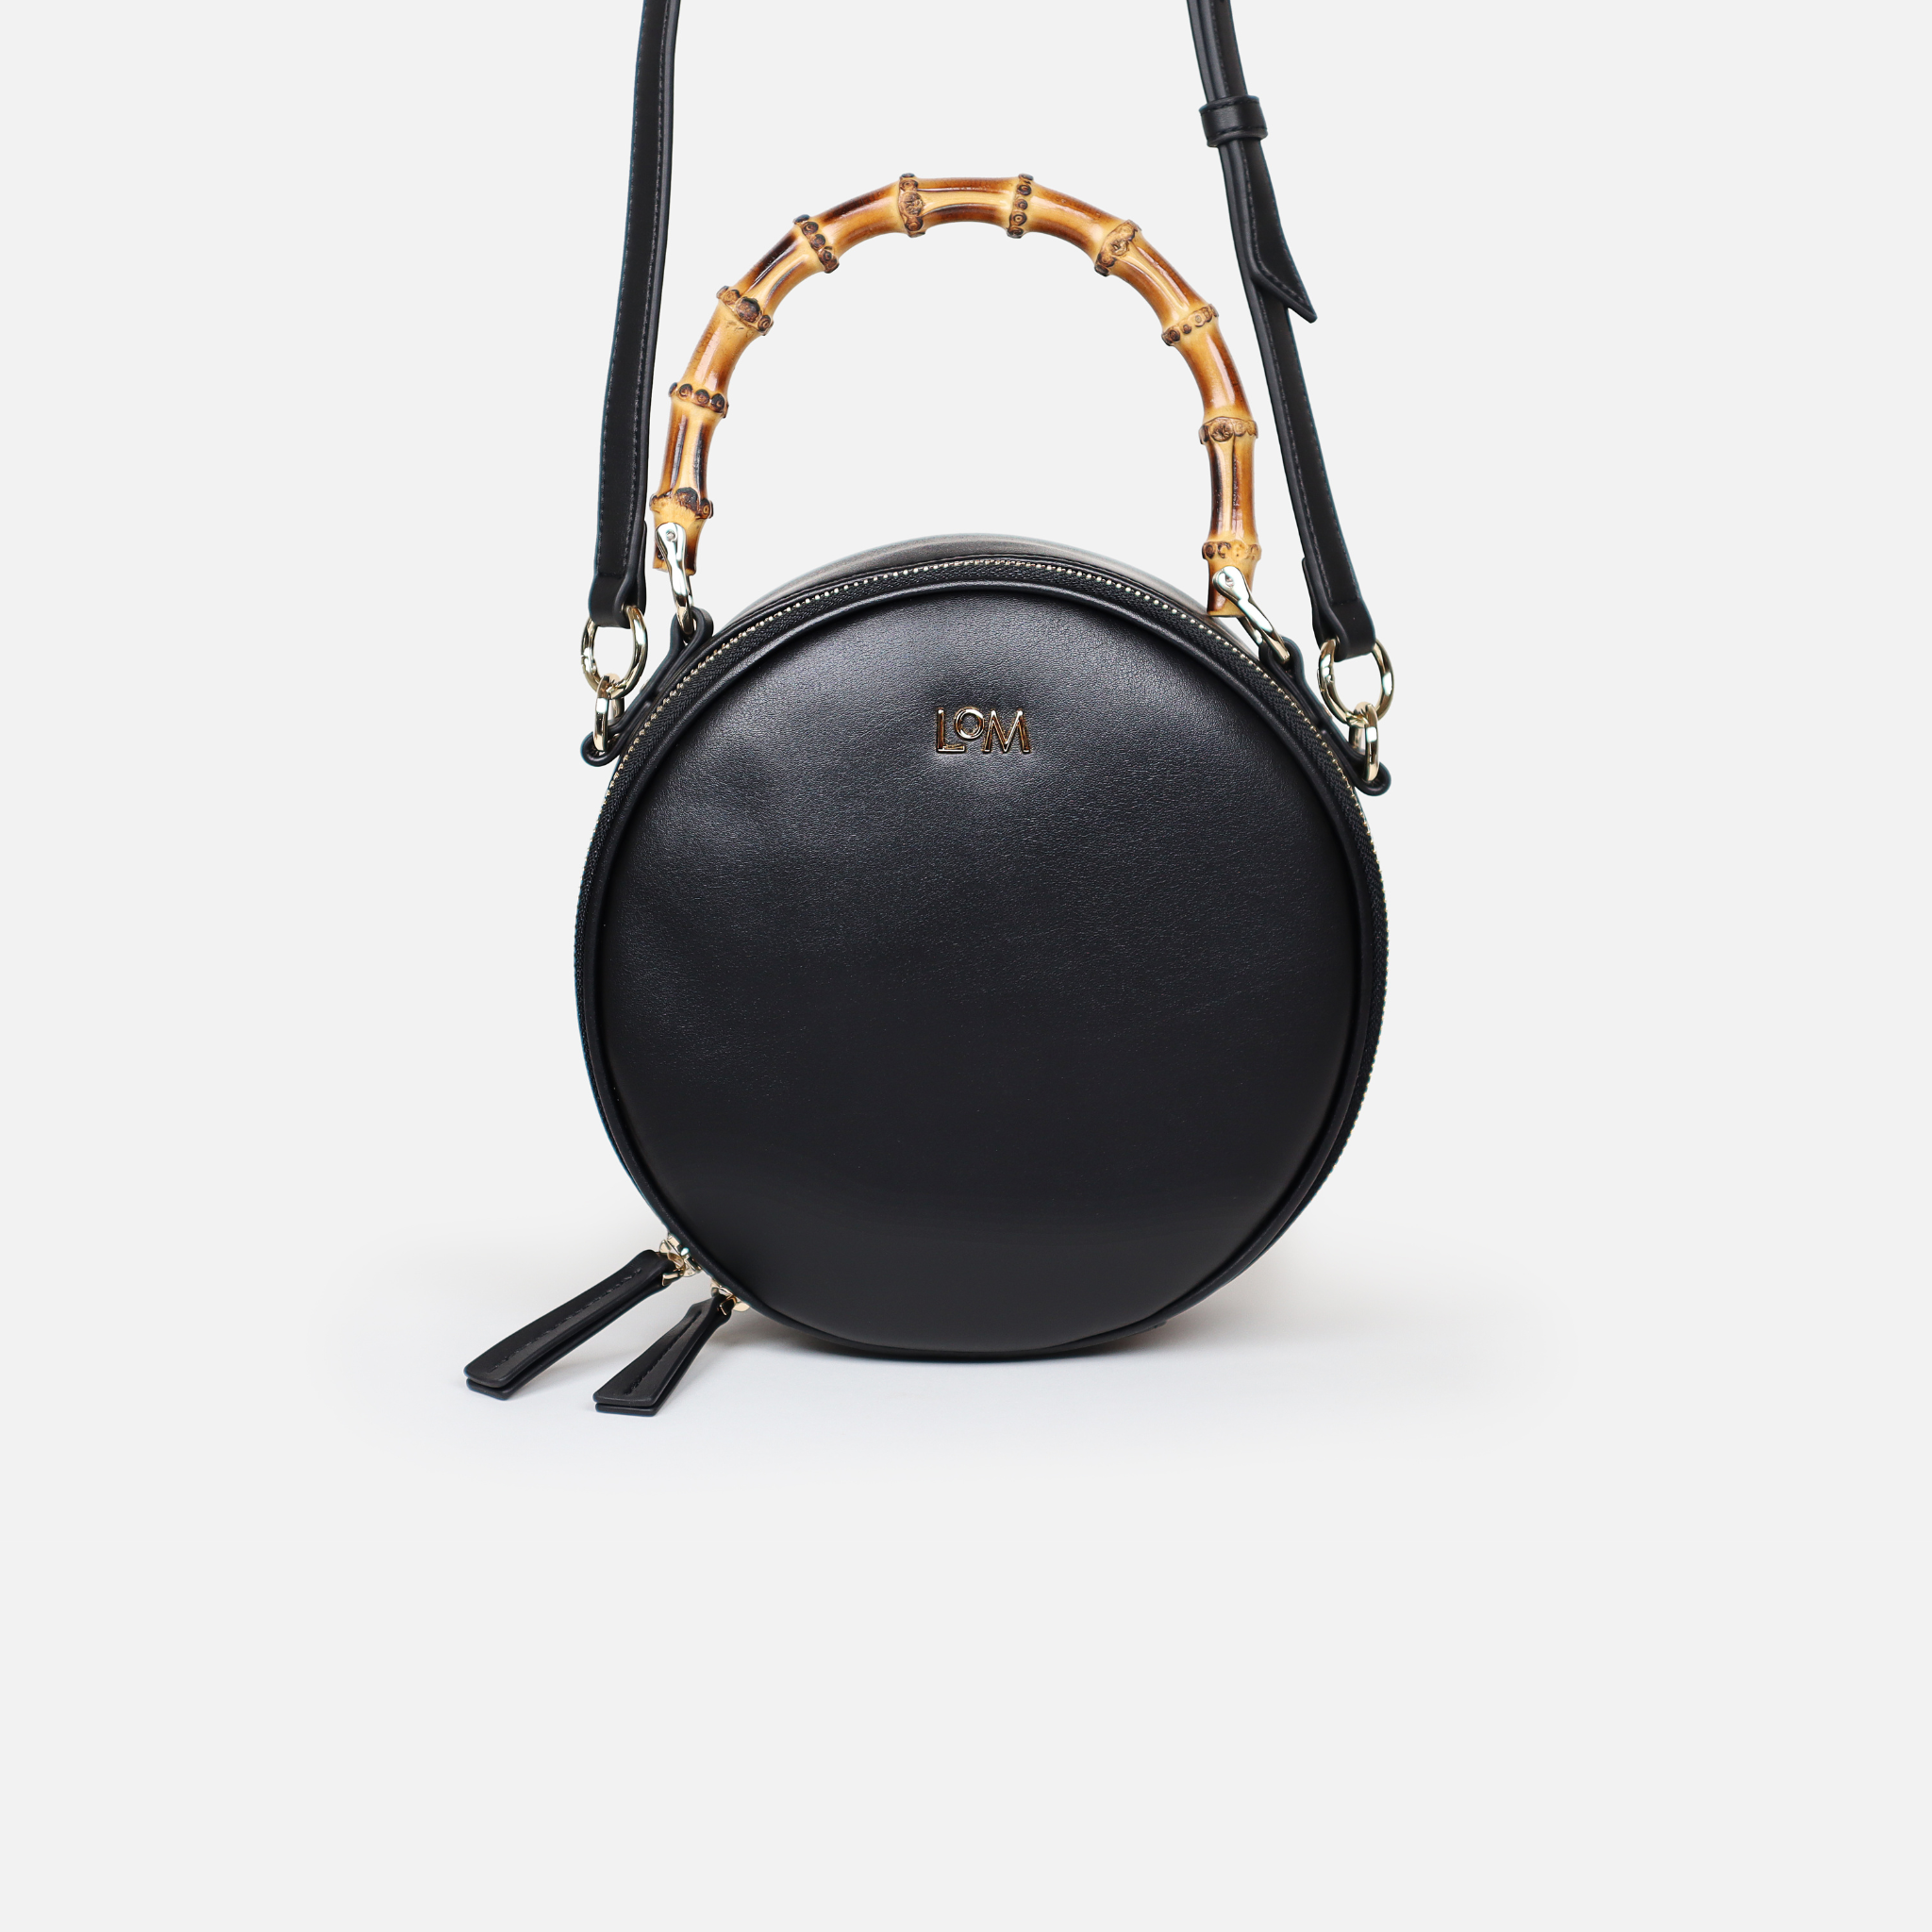 Circular handbag with bamboo handle and long shoulder strap attached.. Made from premium black cactus leather, light gold hardware, black organic cotton lining.